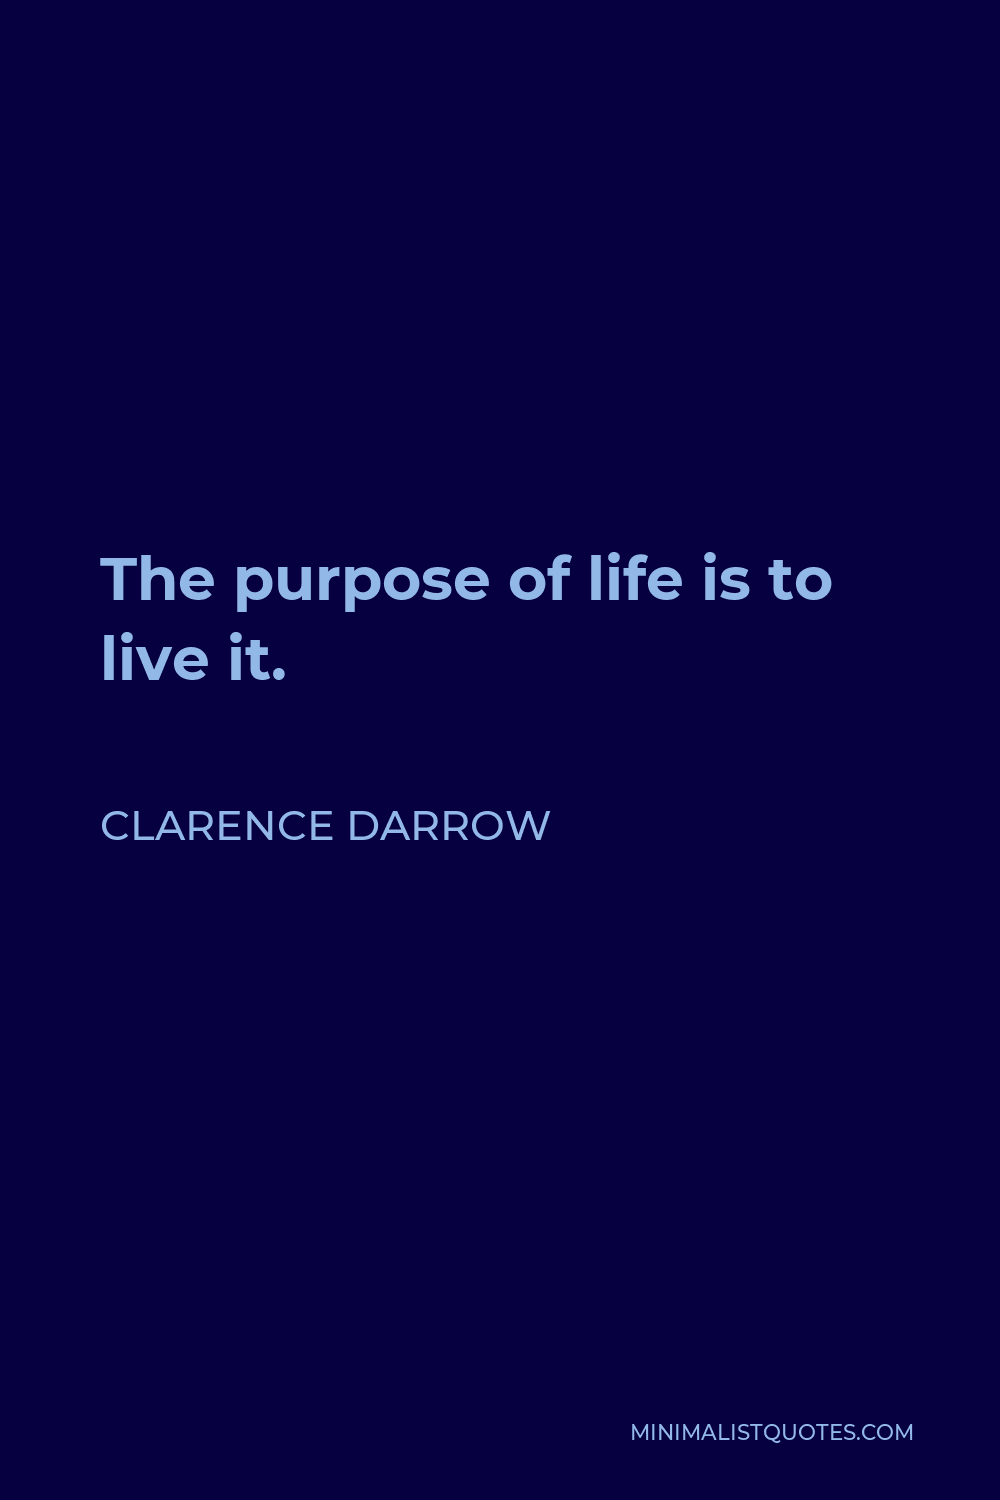 Clarence Darrow Quote - The purpose of life is to live it.